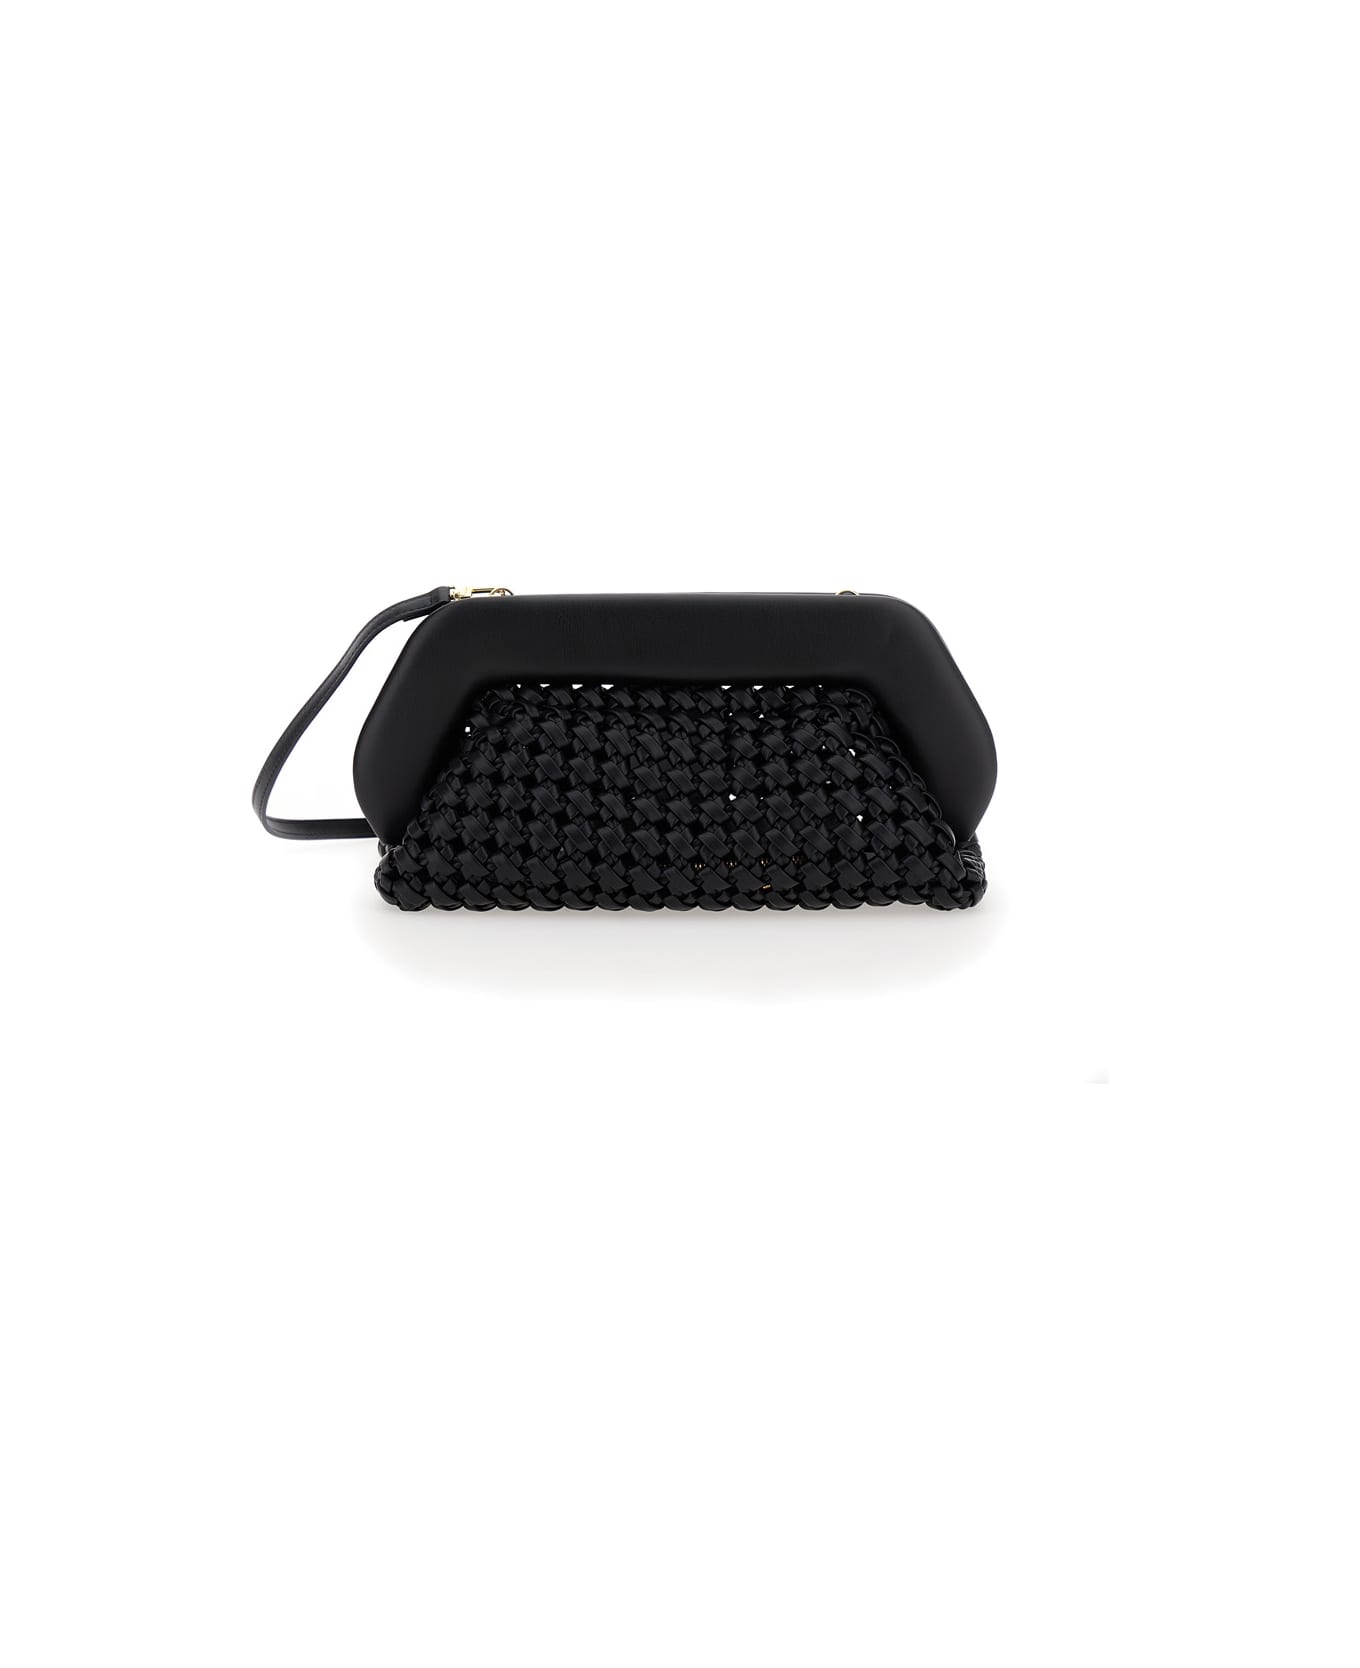 THEMOIRè 'bios Knots' Black Clutch Bag With Braided Design In Eco Leather Woman - Black クラッチバッグ